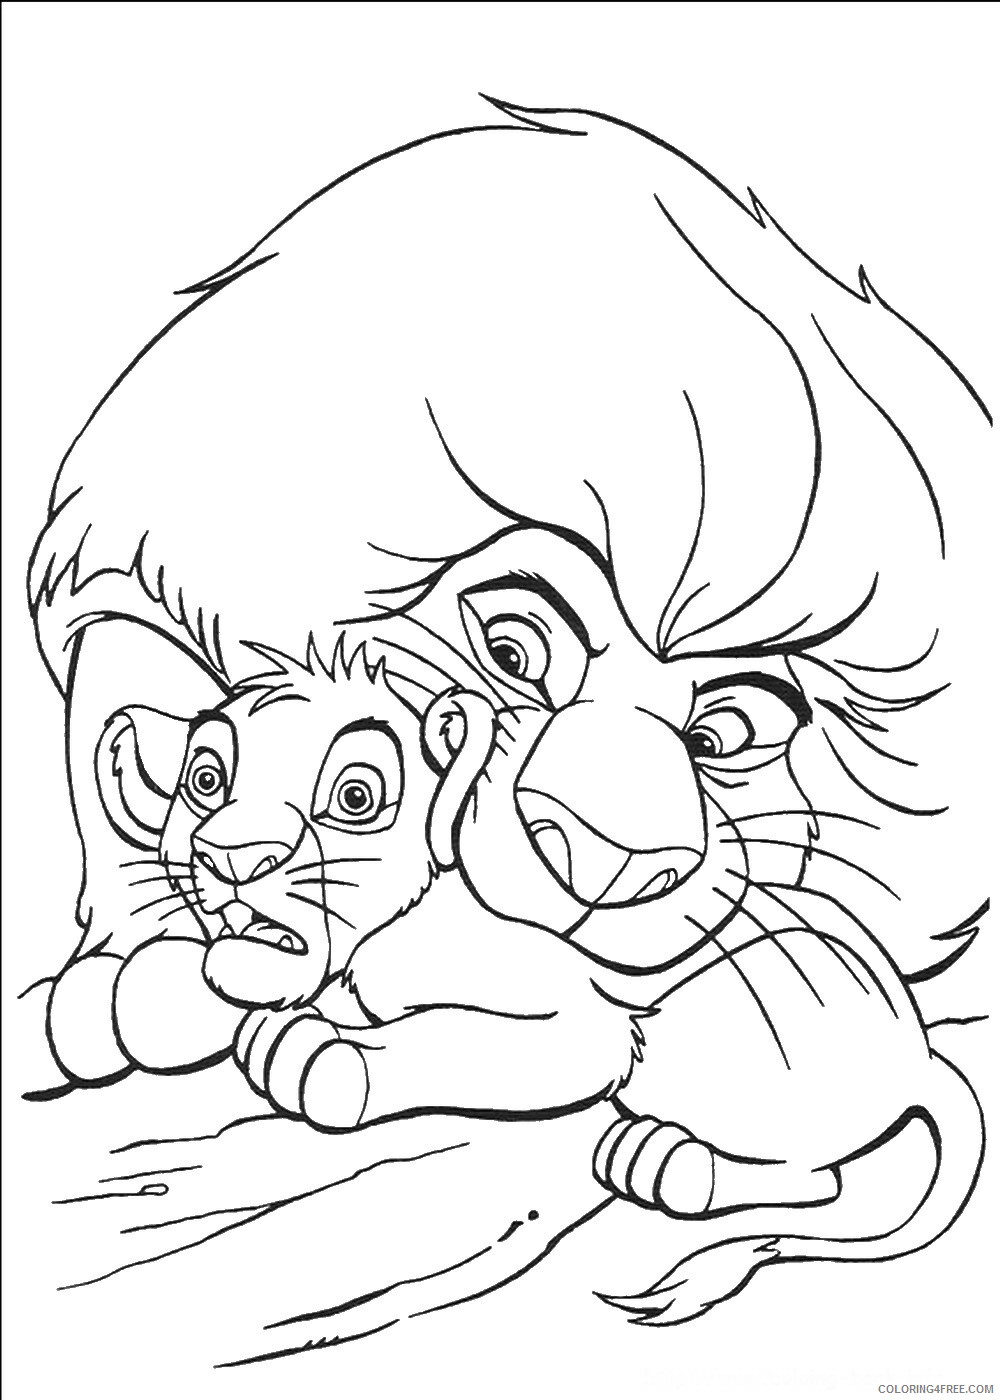 The Lion King Coloring Pages TV Film lionking_63 Printable 2020 09183 Coloring4free